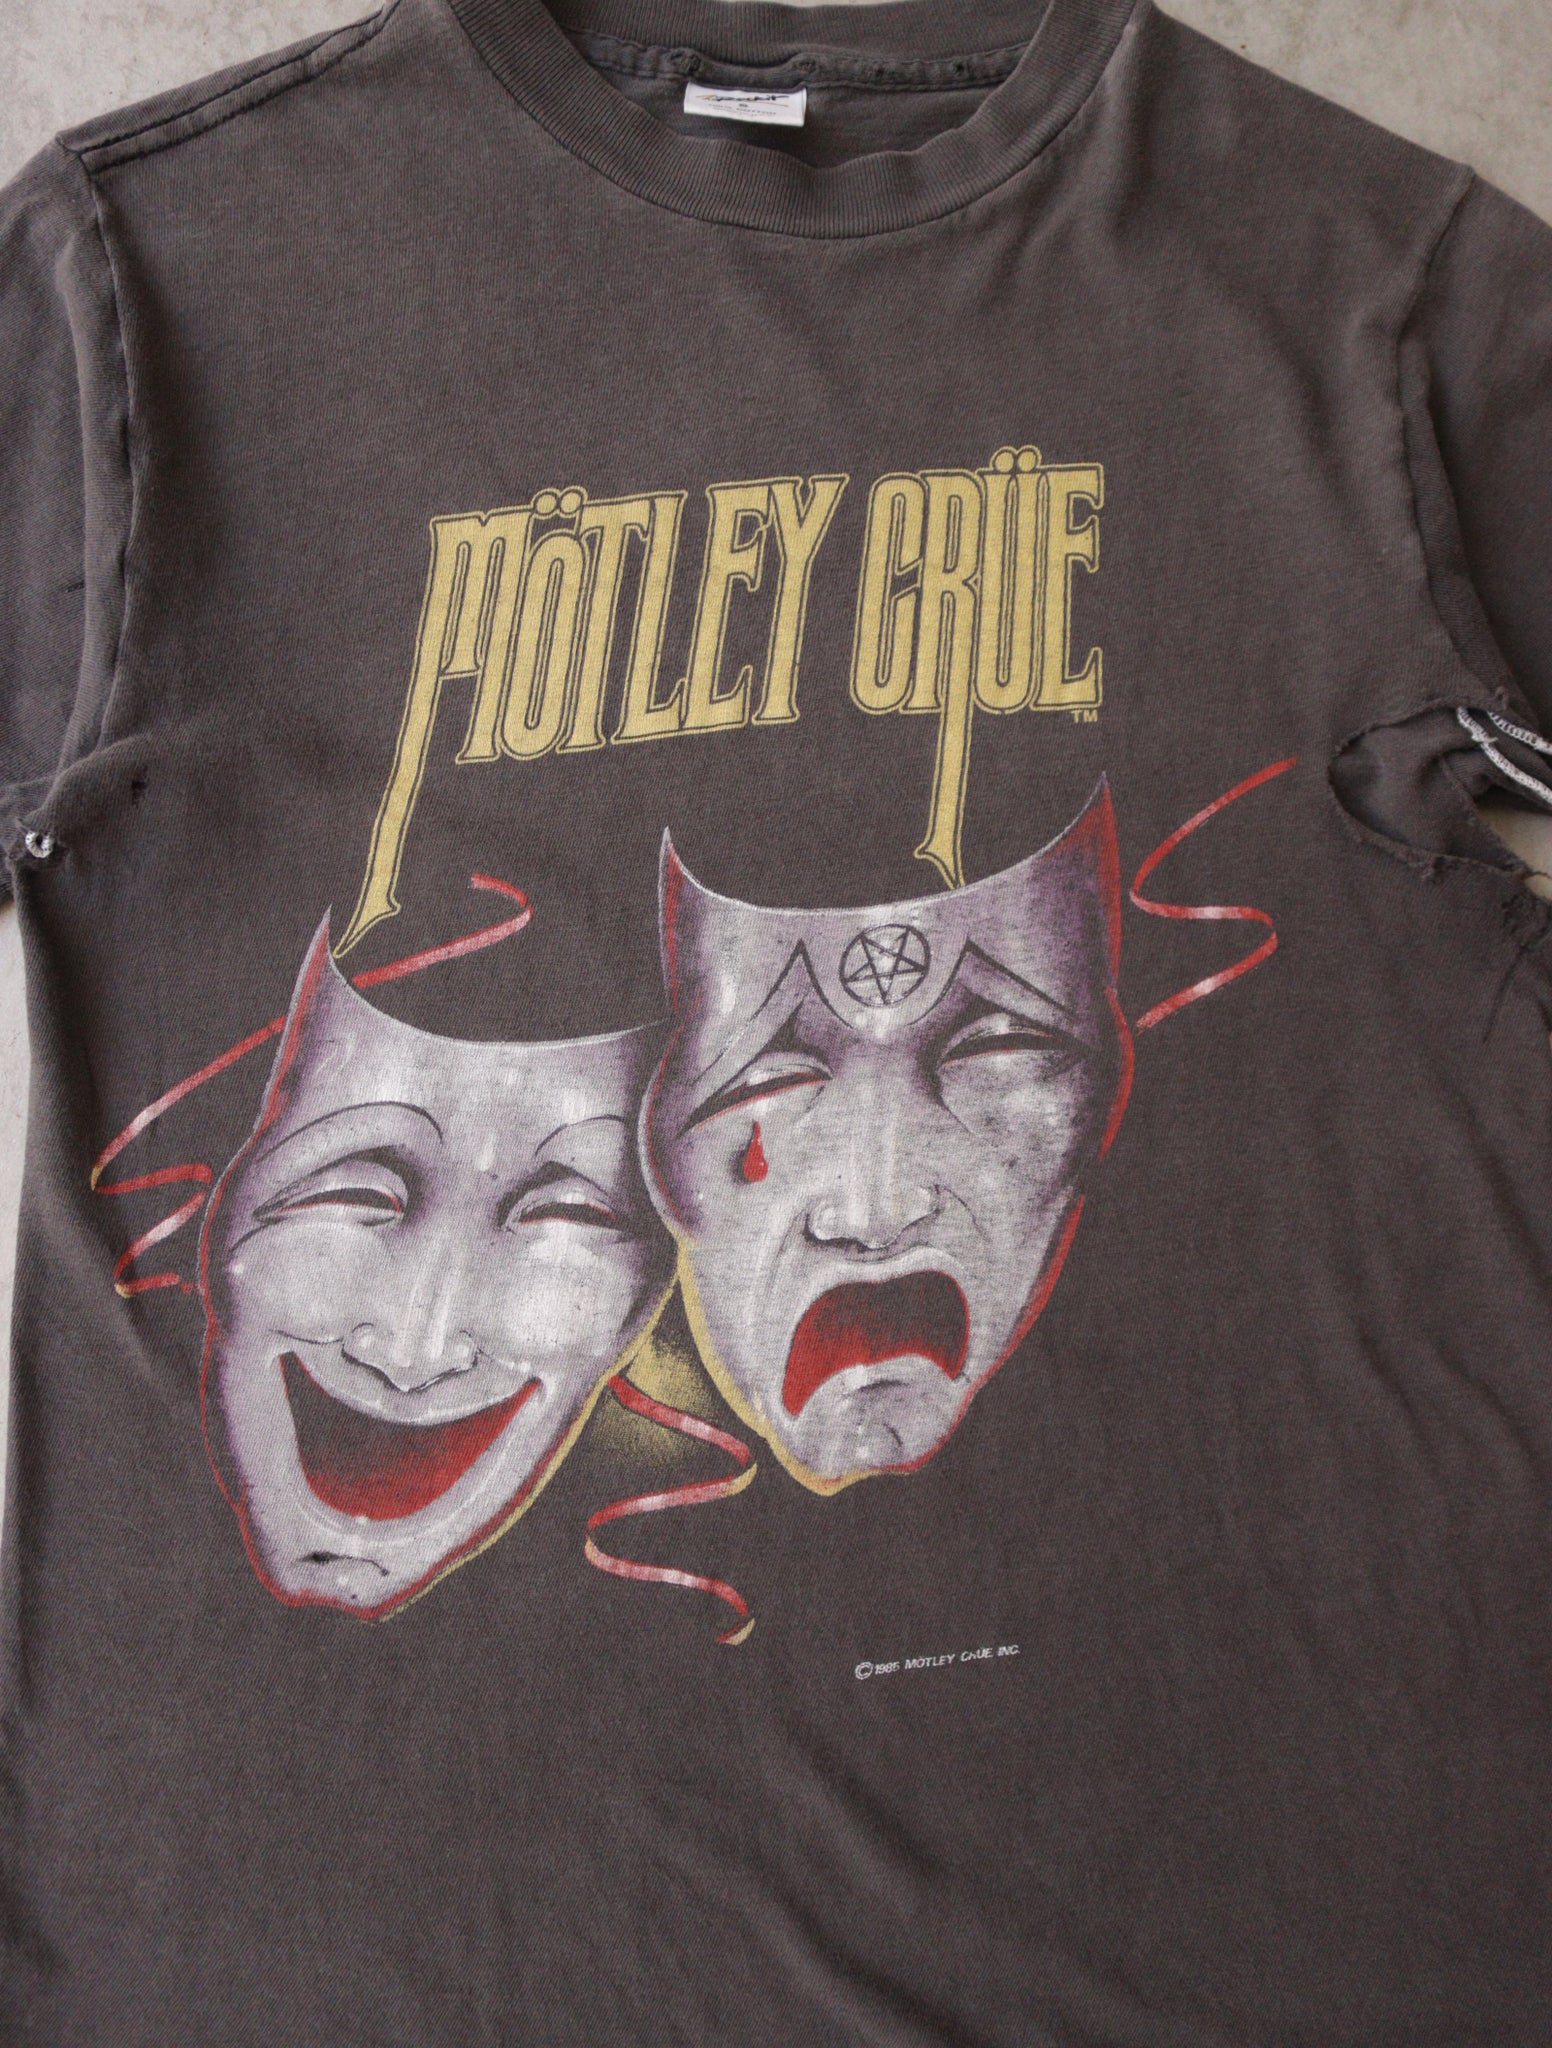 1985 MOTLEY CRUE THEATRE OF PAIN DISTRESSED BAND TEE